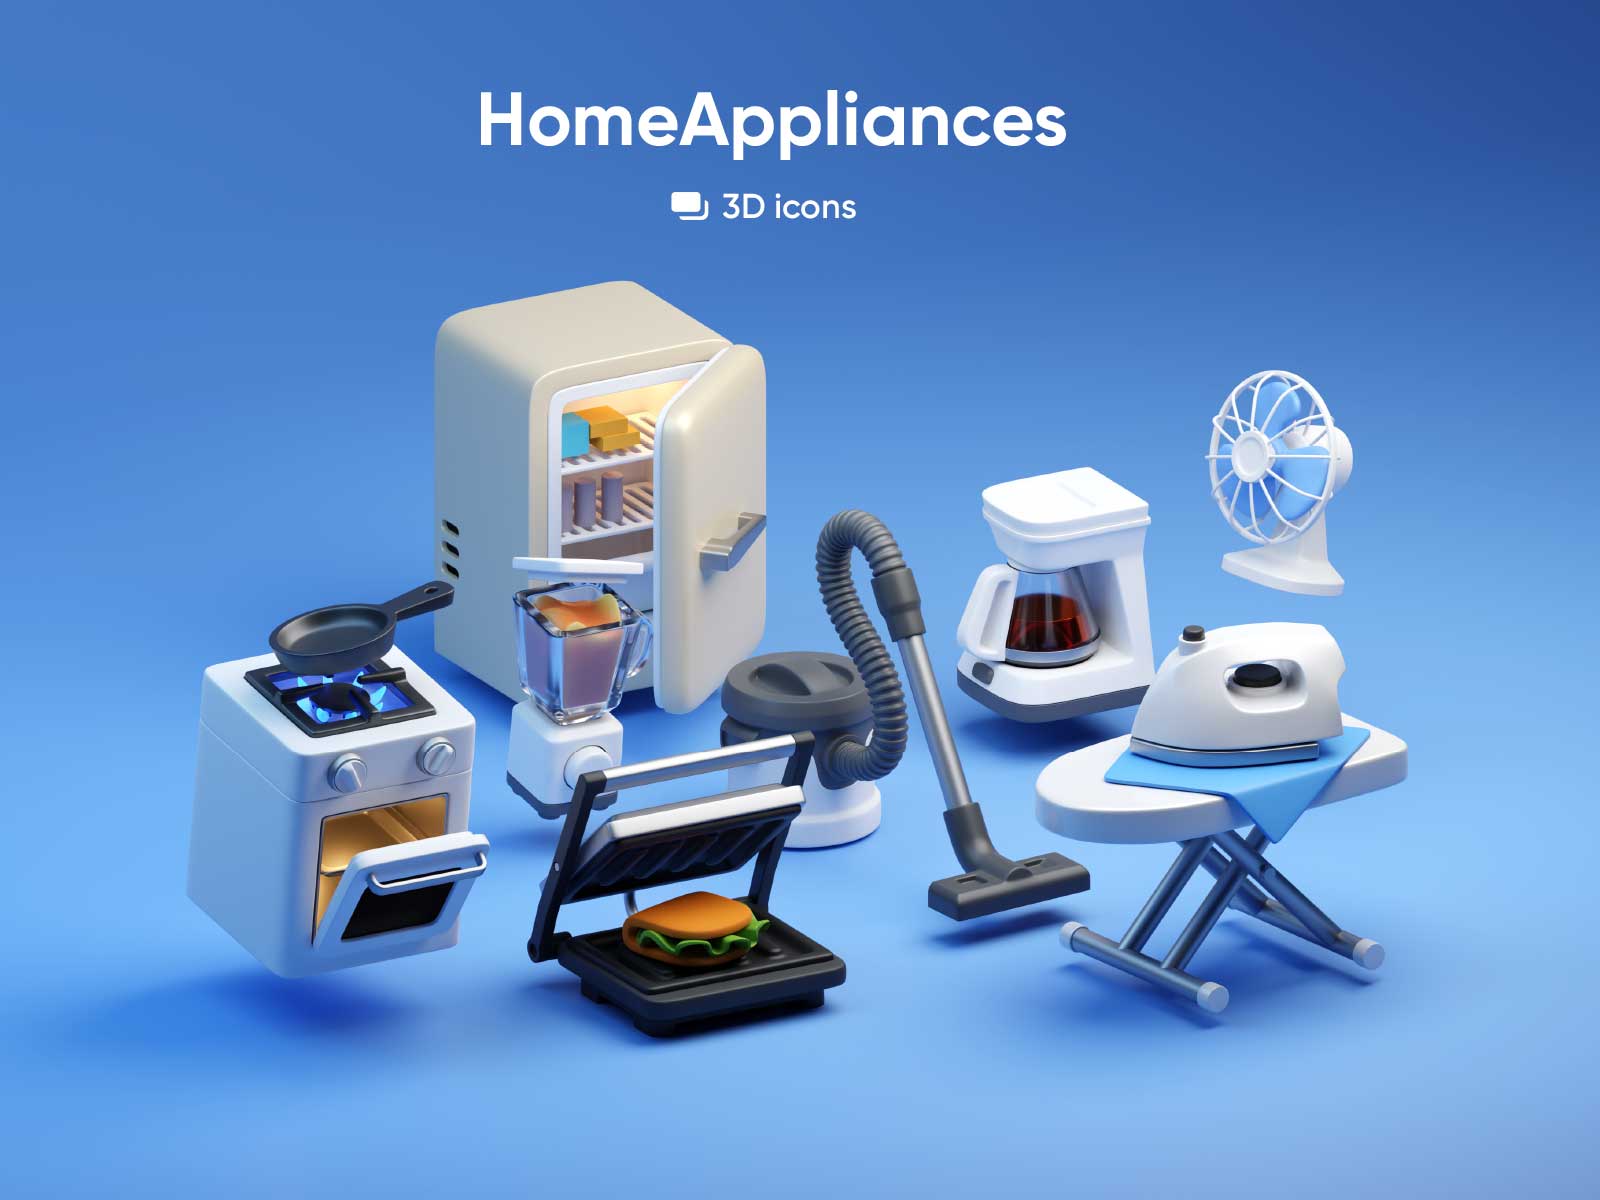 Home Appliances 3D icons by Kit8 on Dribbble